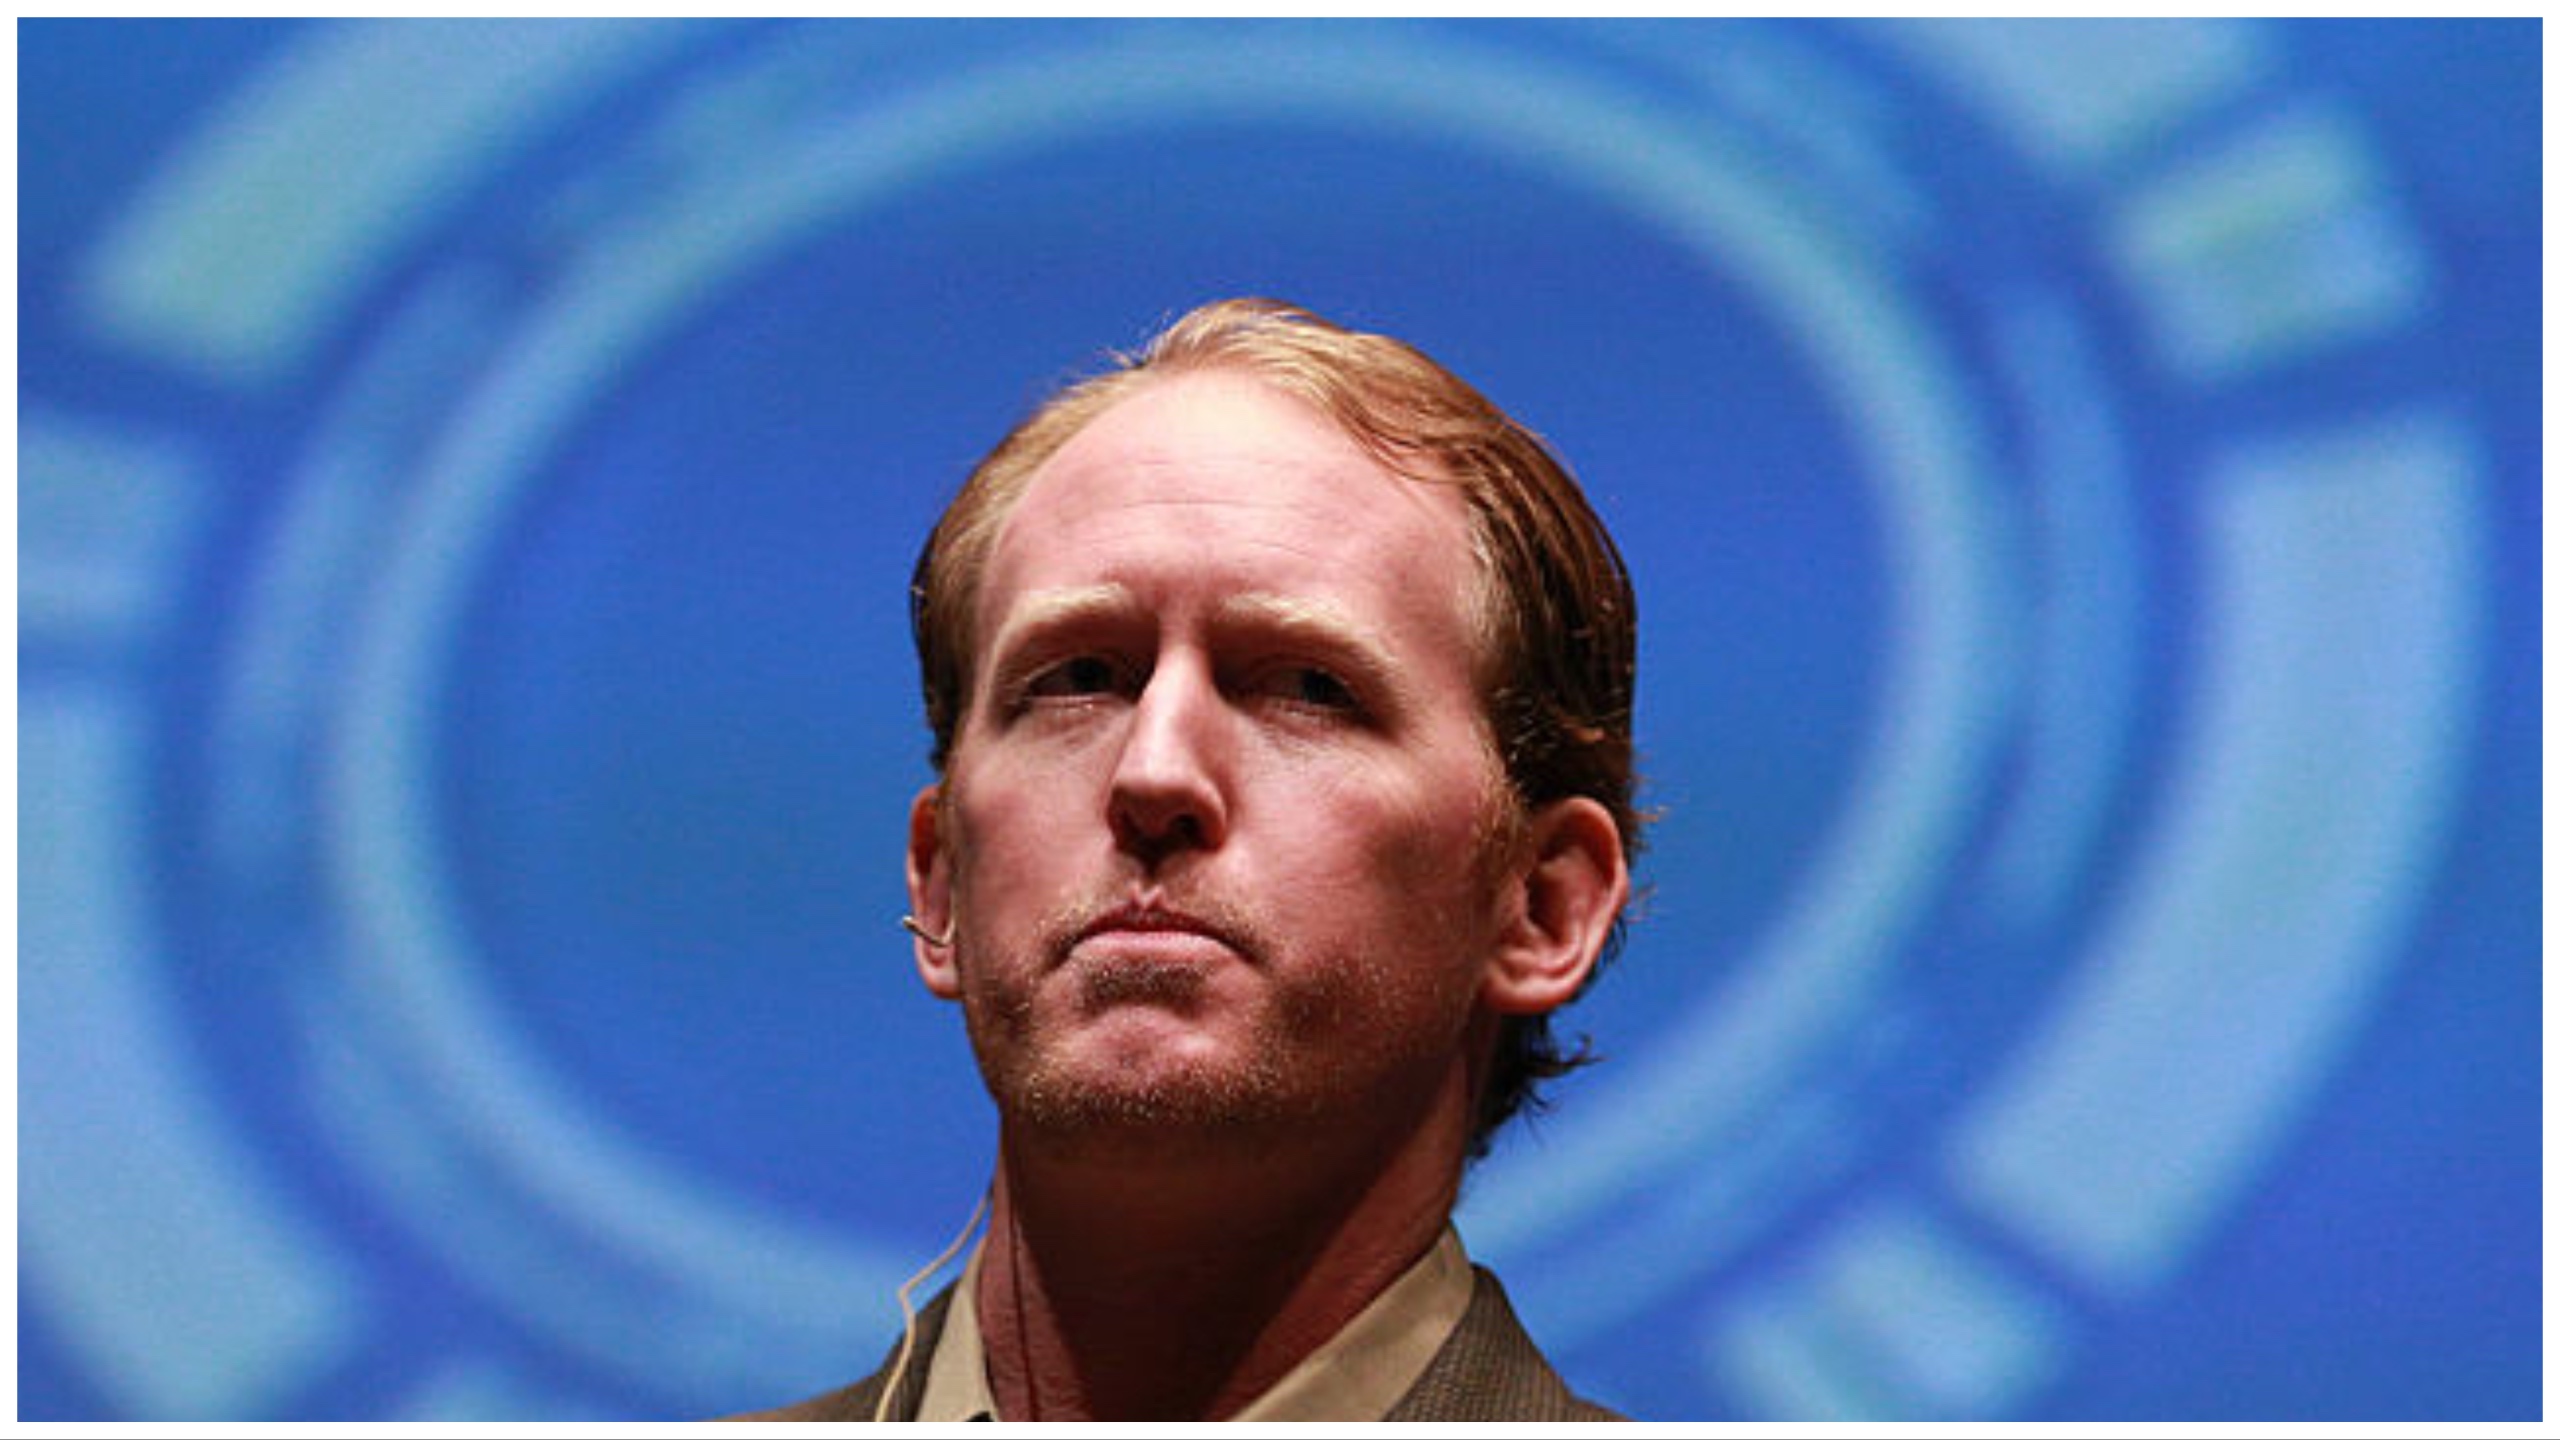 Navy SEAL who killed Bin Laden criticizes U.S. Navy for using drag queen in recruitment.